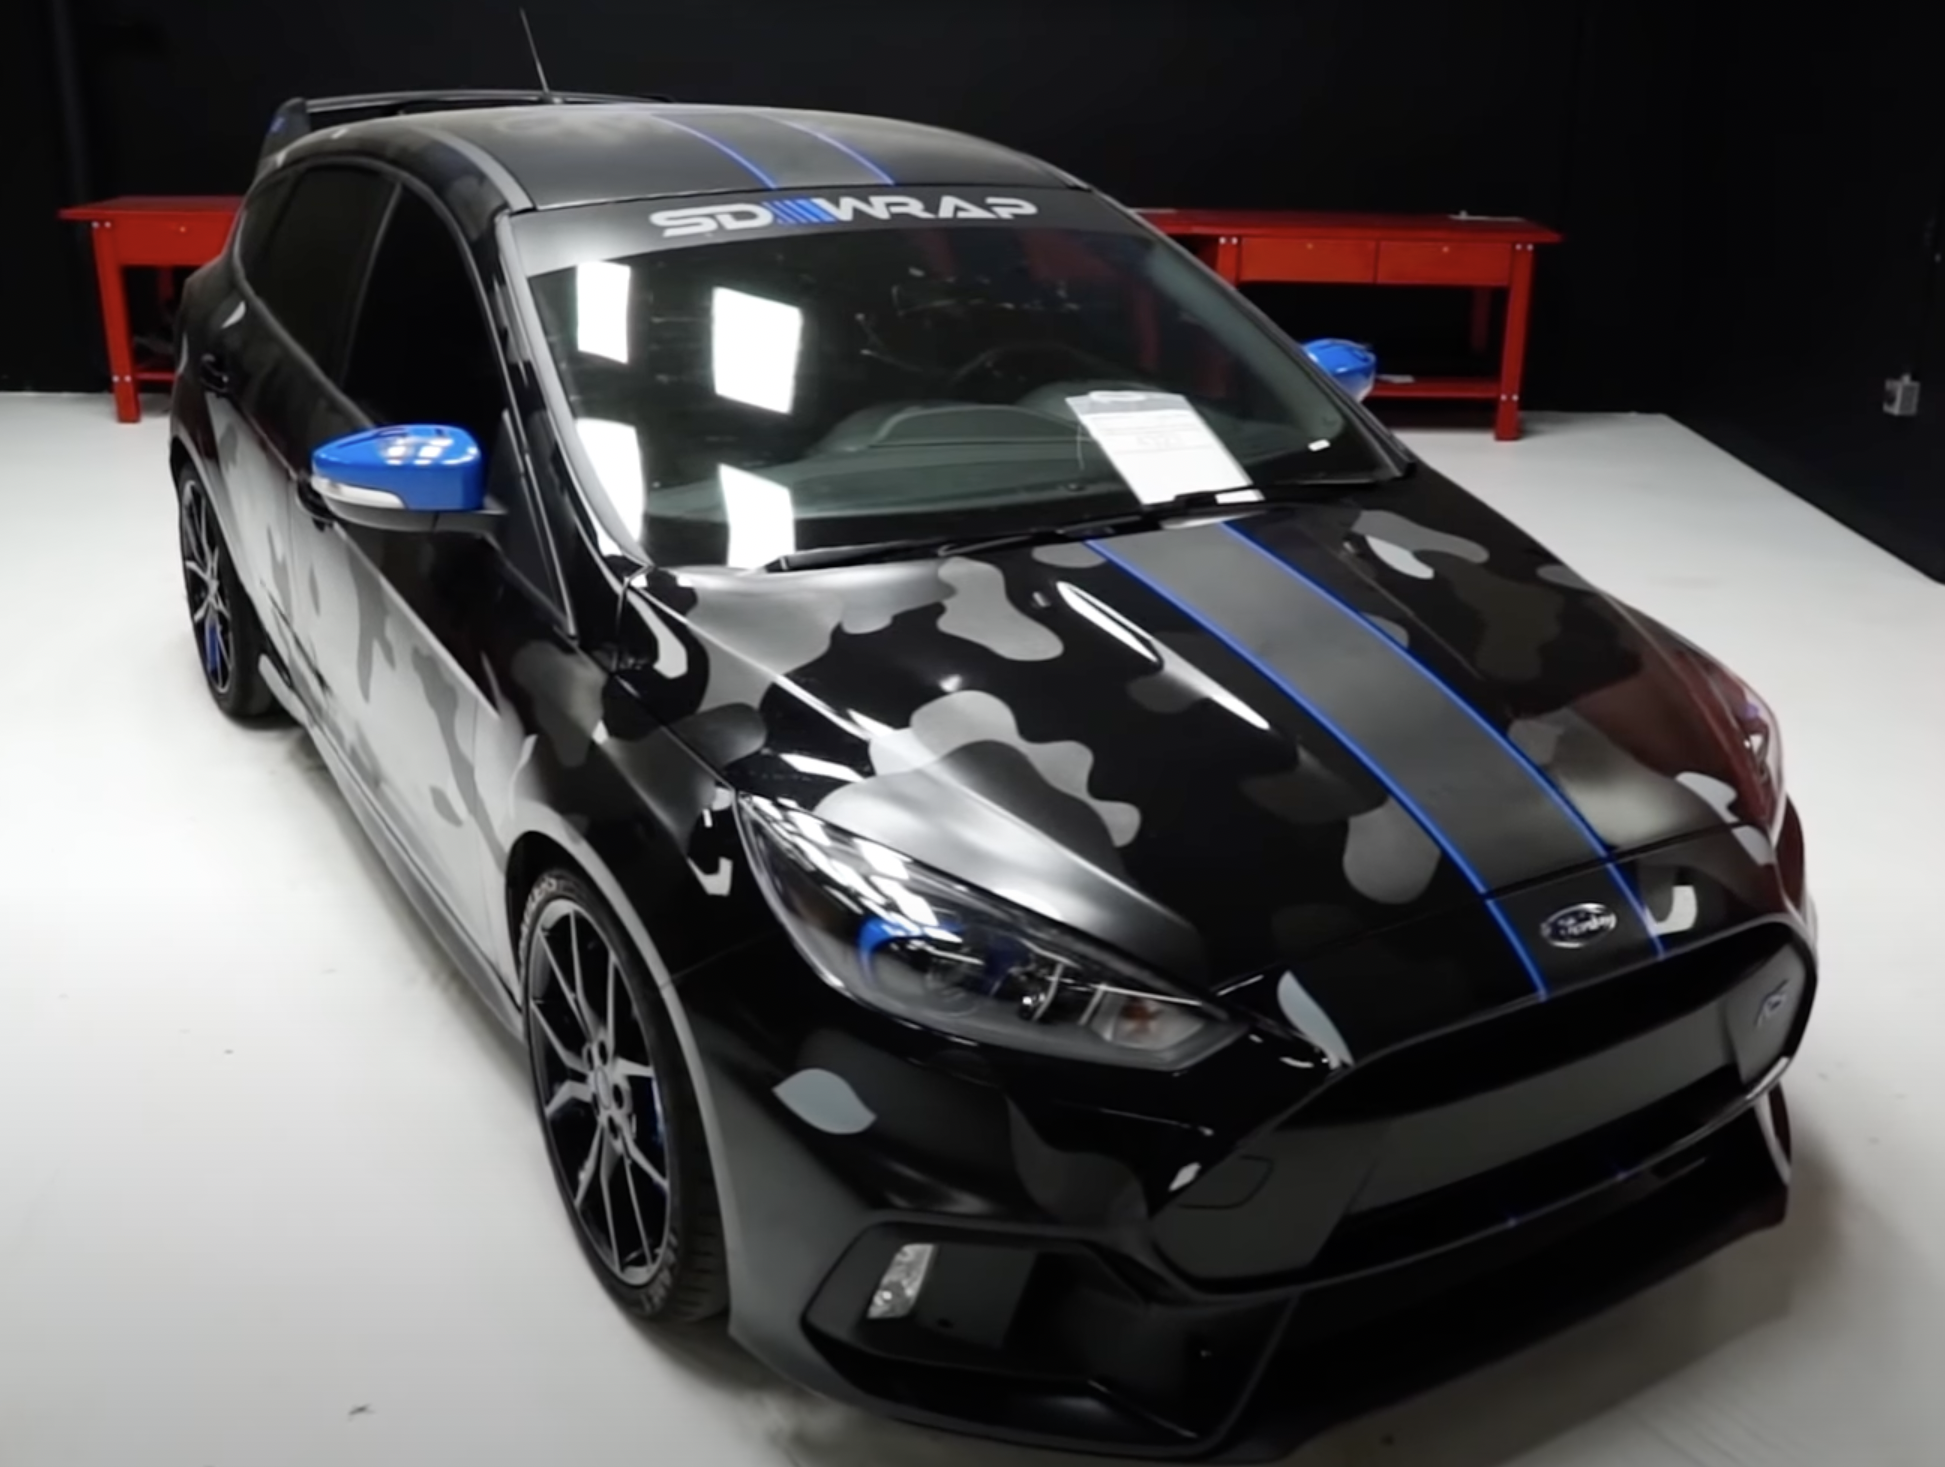 One of Paul's most cherished cars is his £22,000 Ford Focus RS